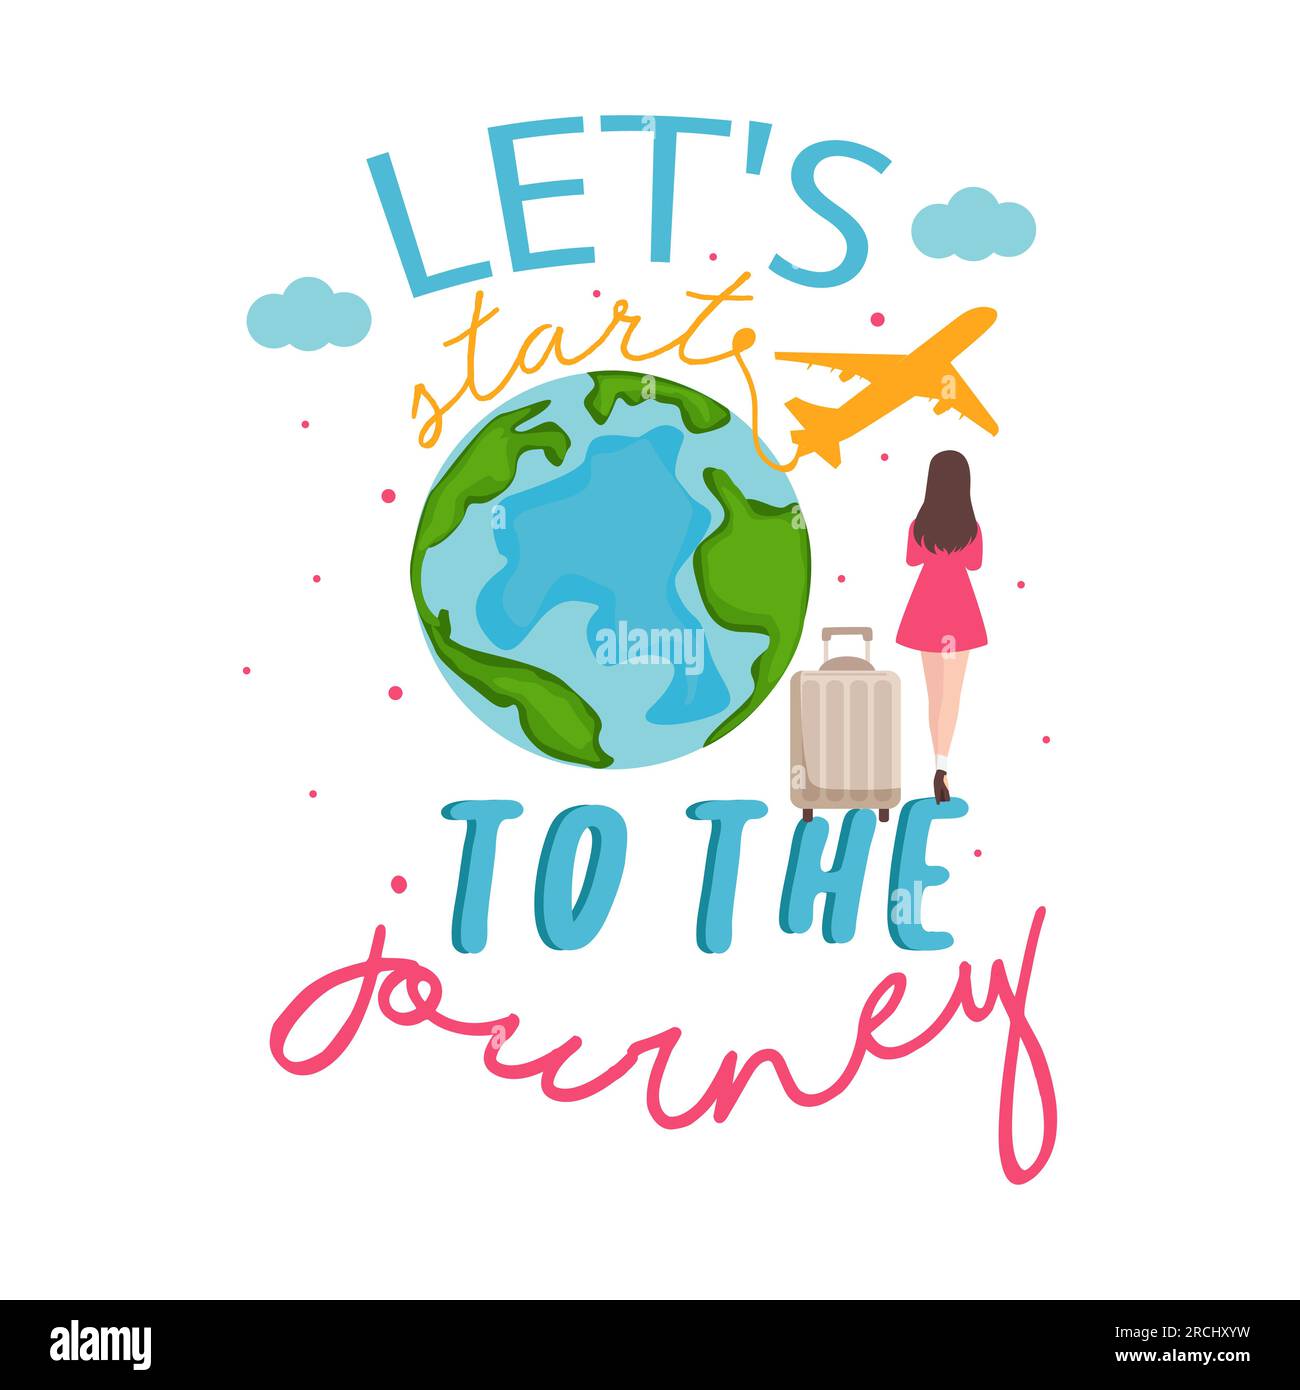 lets start to the journey inspirational quotes girl travel destination adventure vacation typography design colorful text Stock Vector